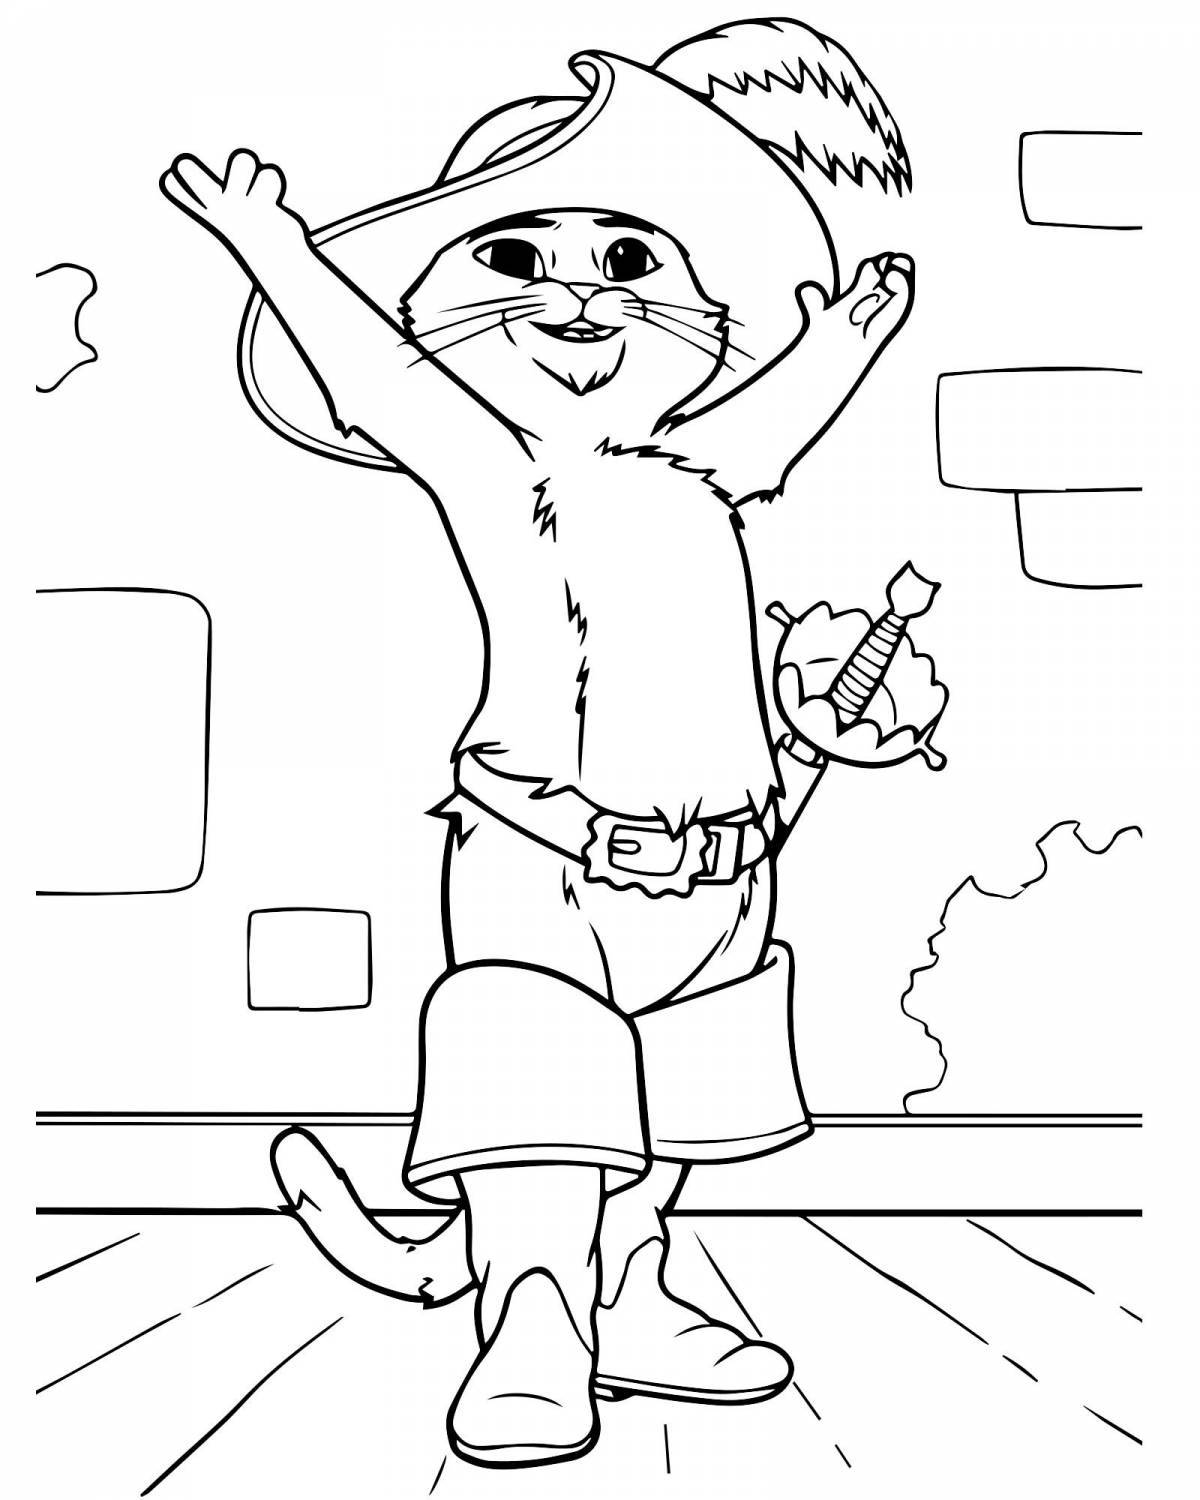 Innovative puss in boots coloring book for kids